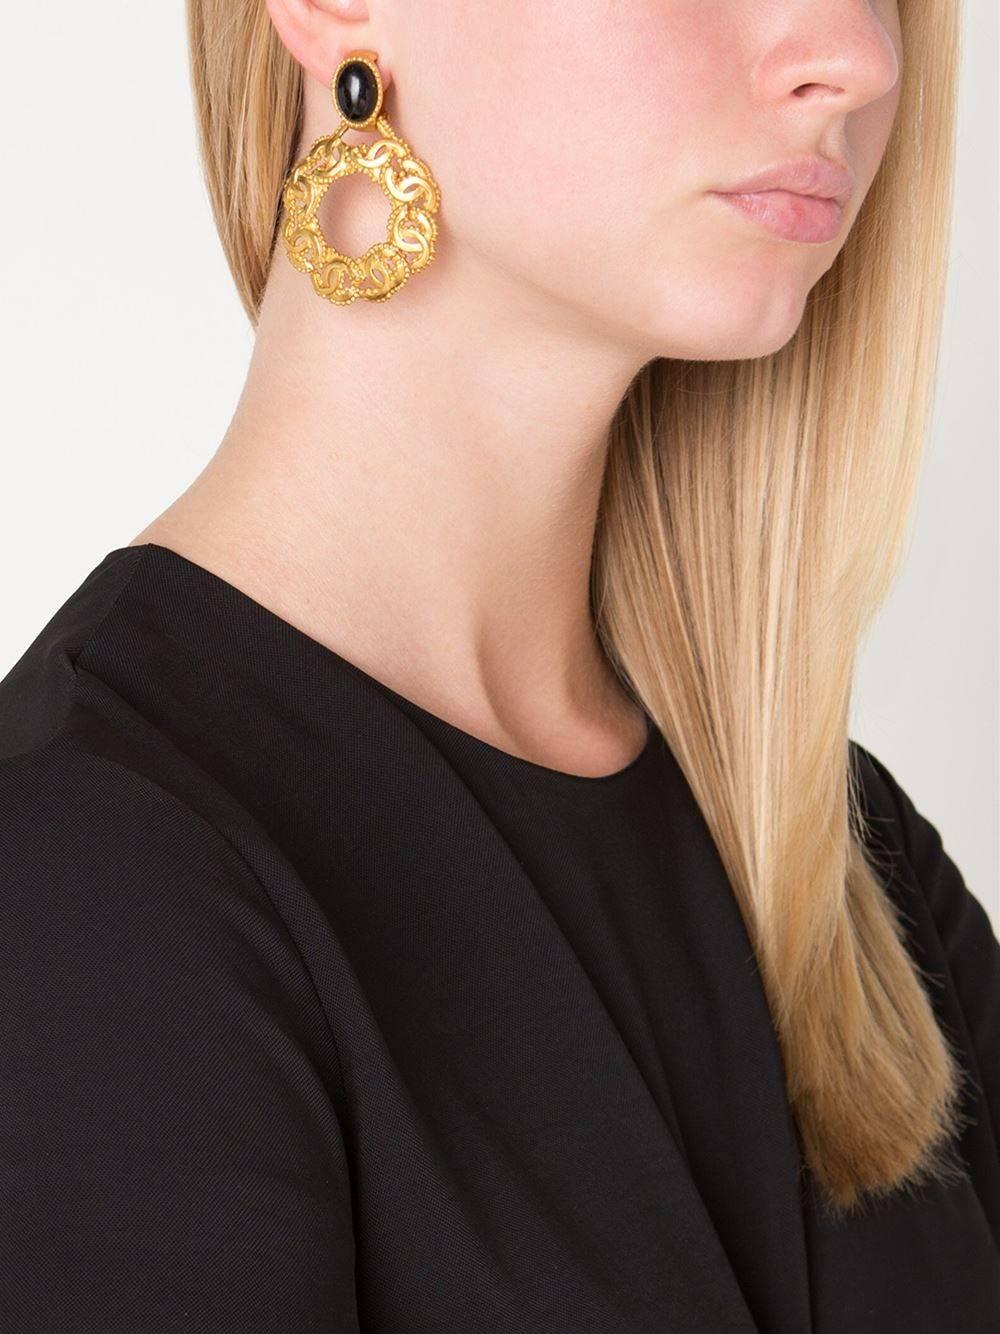 CURATOR'S NOTES

CHANEL Vintage Gold Round Charm Filigree Chain Hoop Evening Earrings in Box  

Metal
Enamel
Gold tone
Clip on closure
Made in France
Width 1.75"
Drop 2.5"
Includes original Chanel box